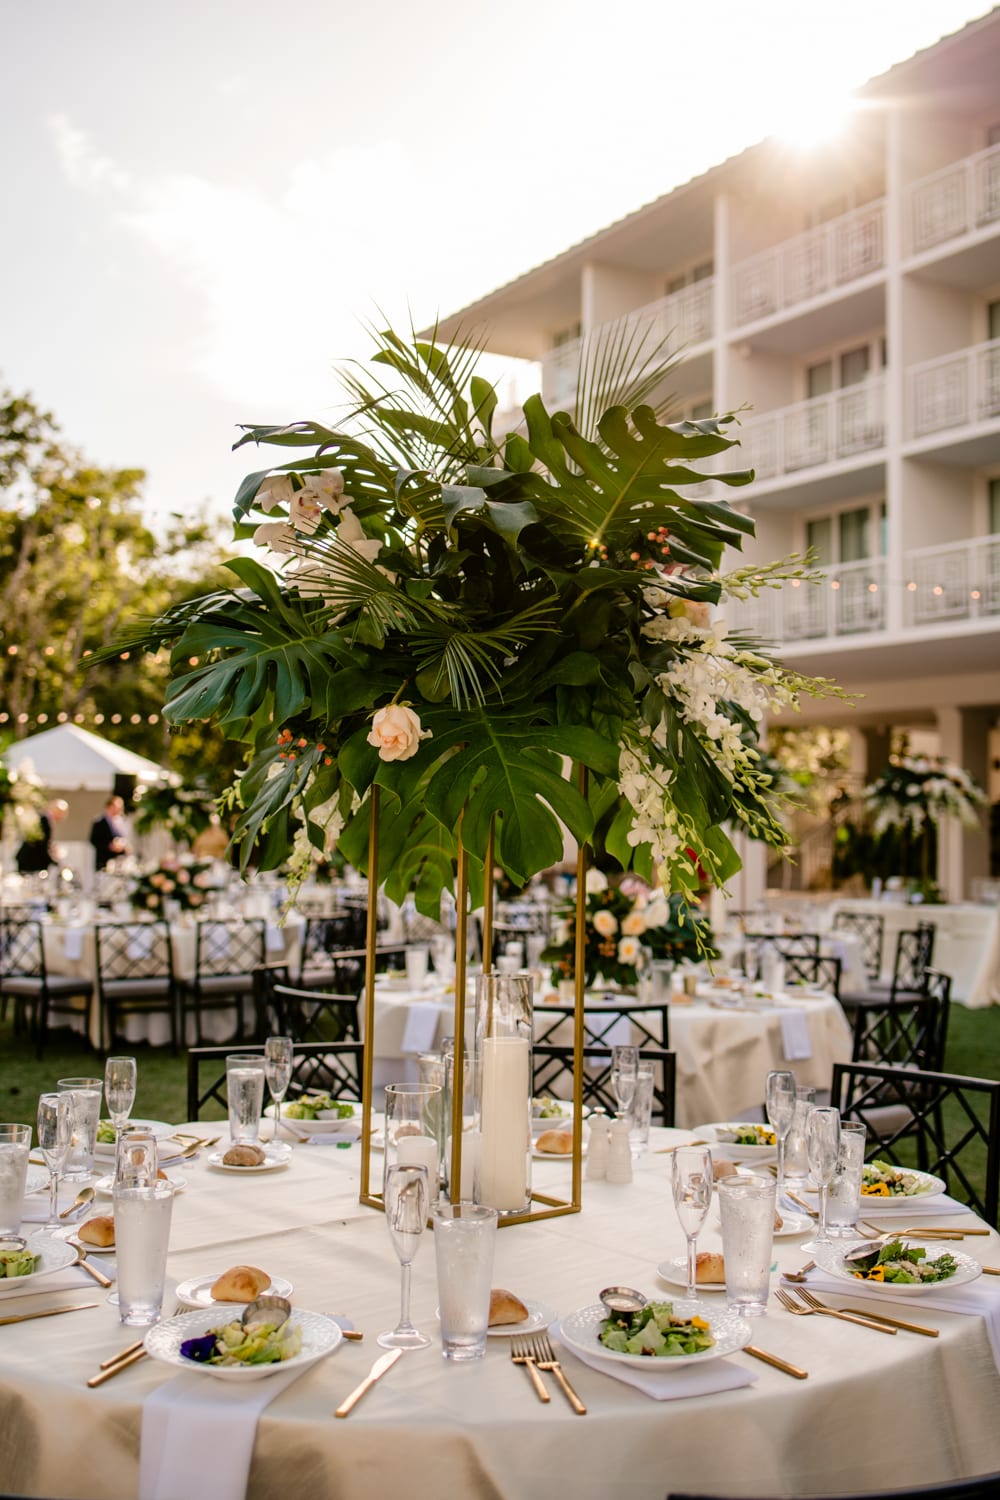 A wedding reception at Bakers Cay Resort with a tropical setting.